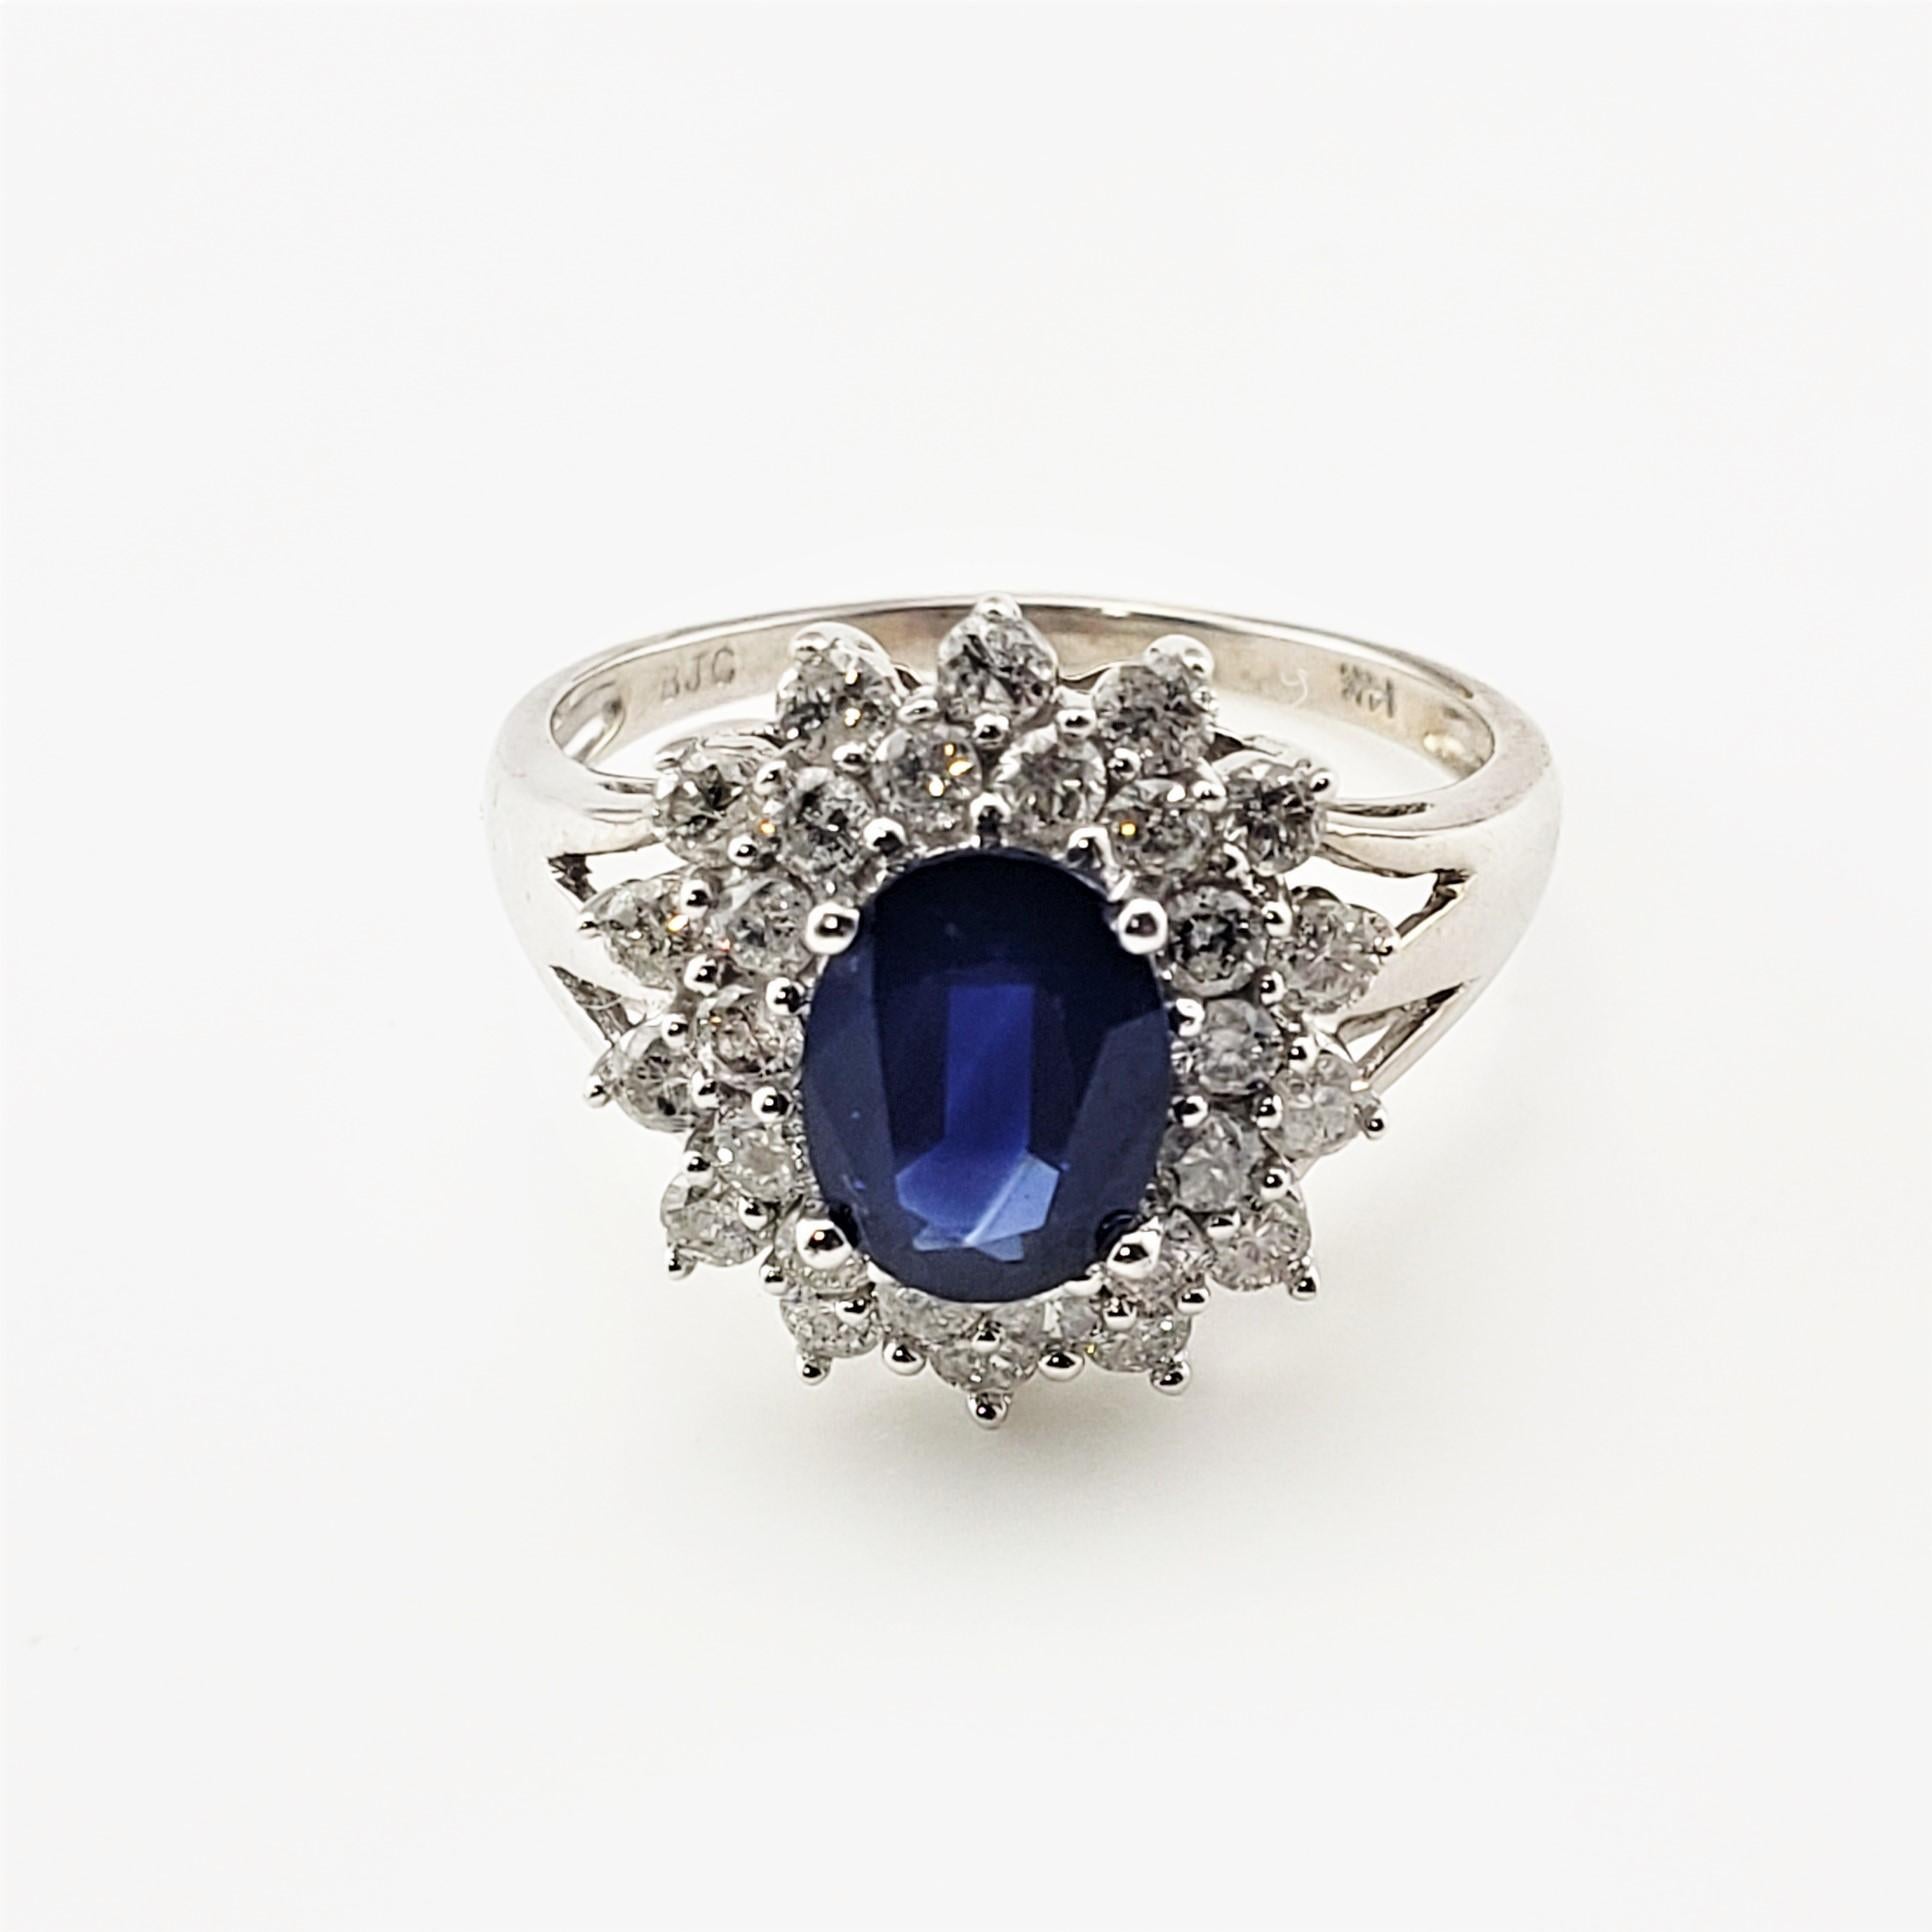 14 Karat White Gold Sapphire and Diamond Ring Size 7.25 GAI Certified-

This spectacular ring features one oval cut sapphire (8 mm x 6 mm) and 28 round brilliant cut diamond set in classic 14K white gold.
Top of ring measures 15 mm x 14 mm.  Shank